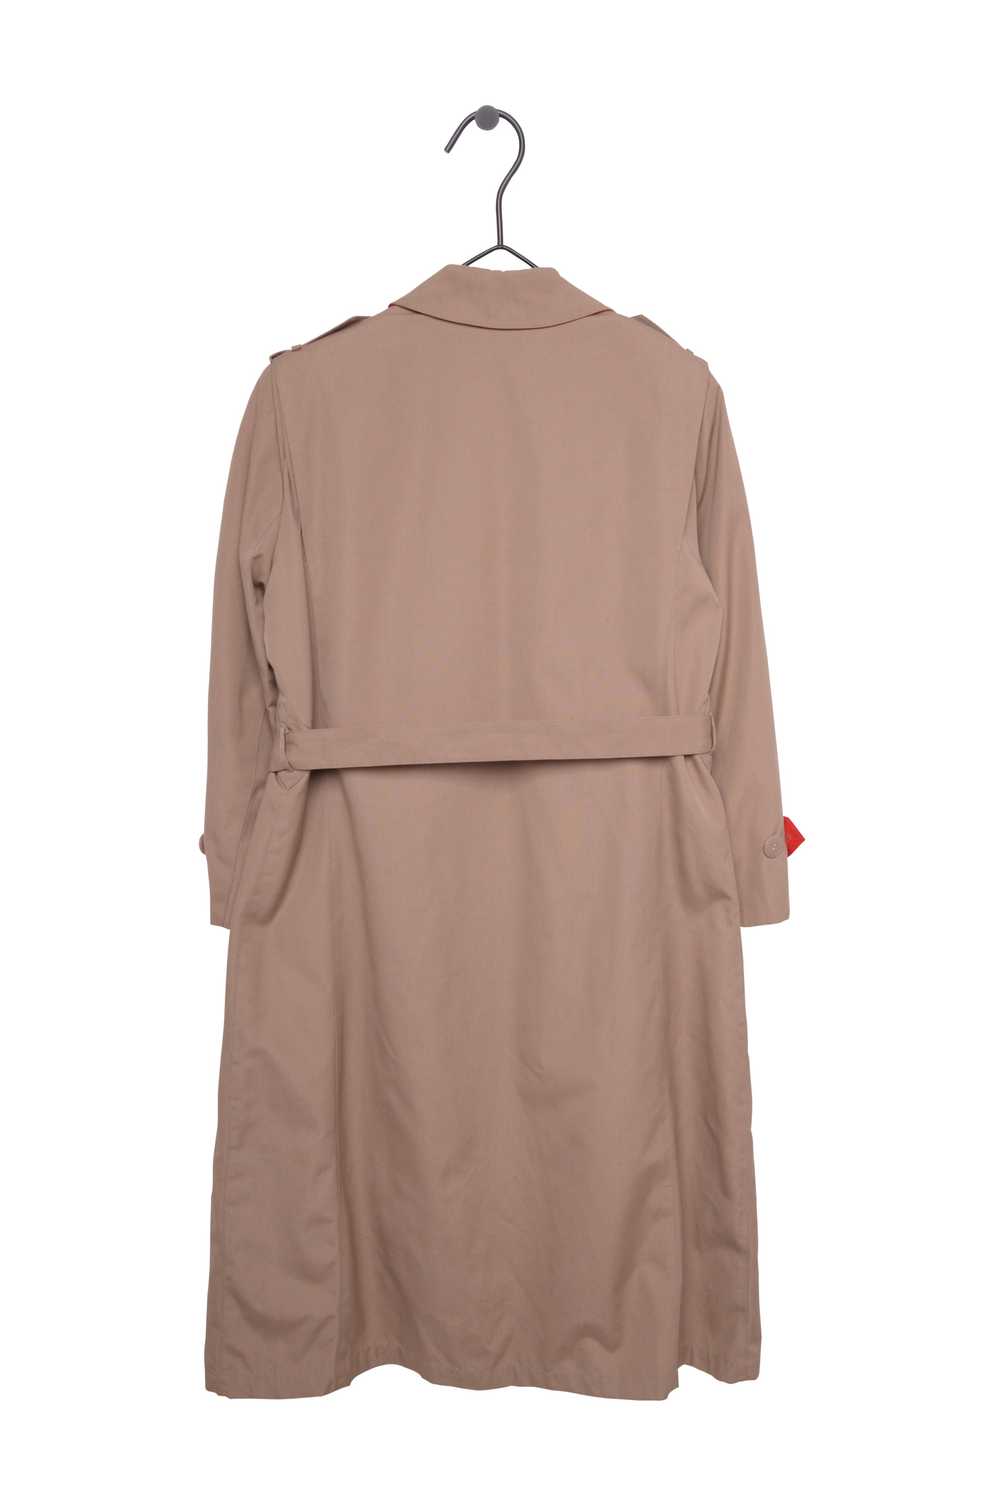 Lined Belted Trench Coat - image 3